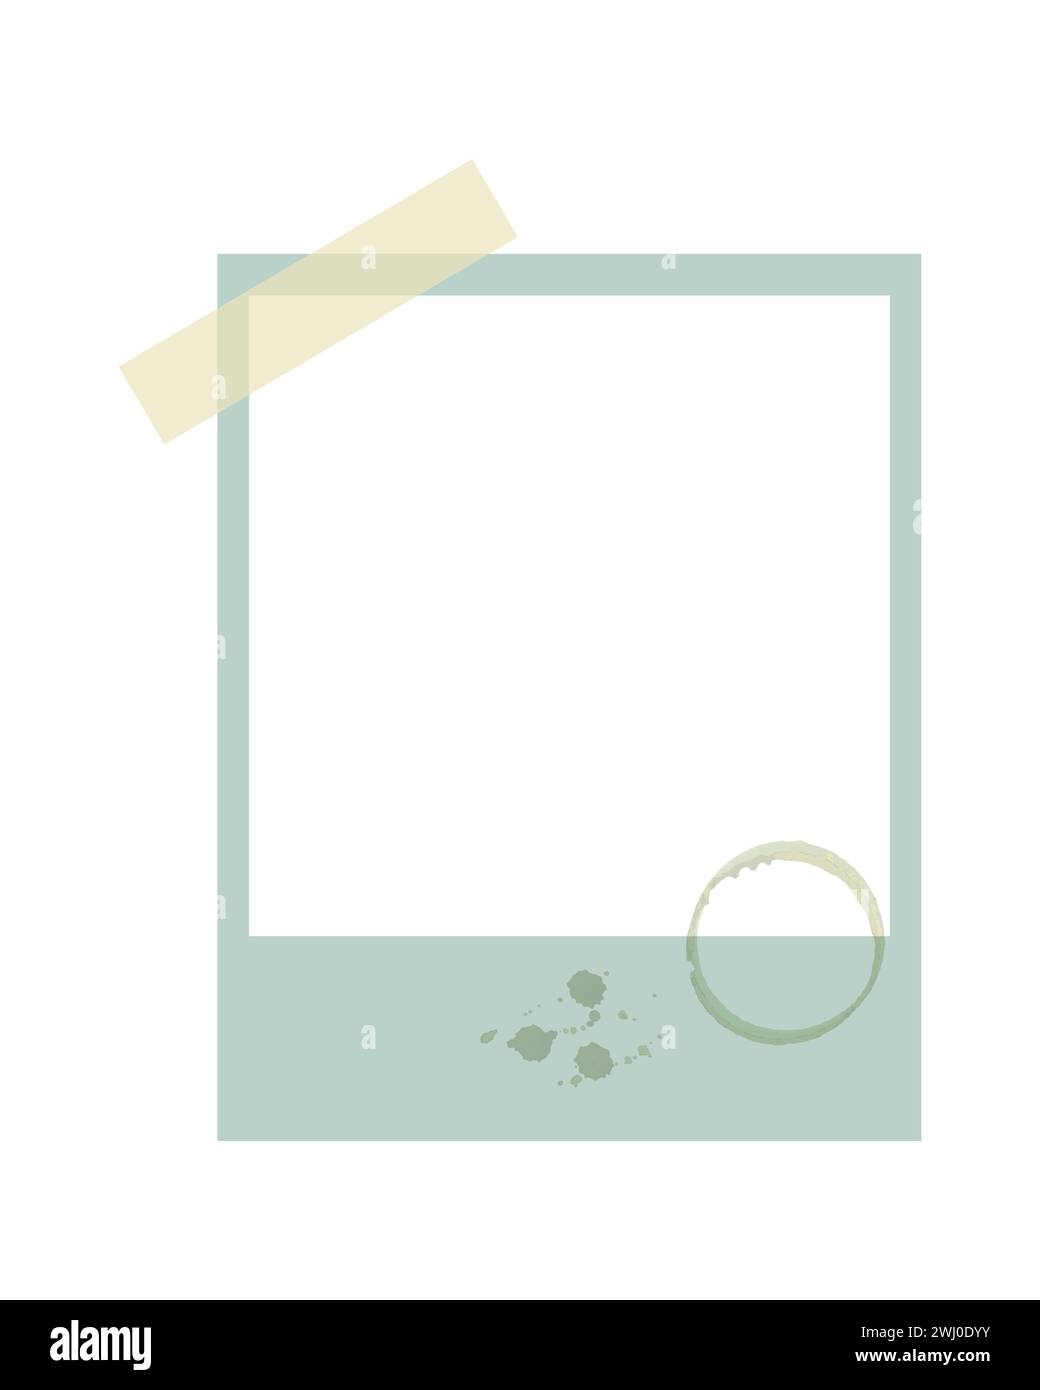 Digital scrapbooking element Blank note frame attached to the wall with sticky tape, with round imprint of coffee stain and splatters and drops, vintage element for scrapbooking design. Vector illustration Stock Vector